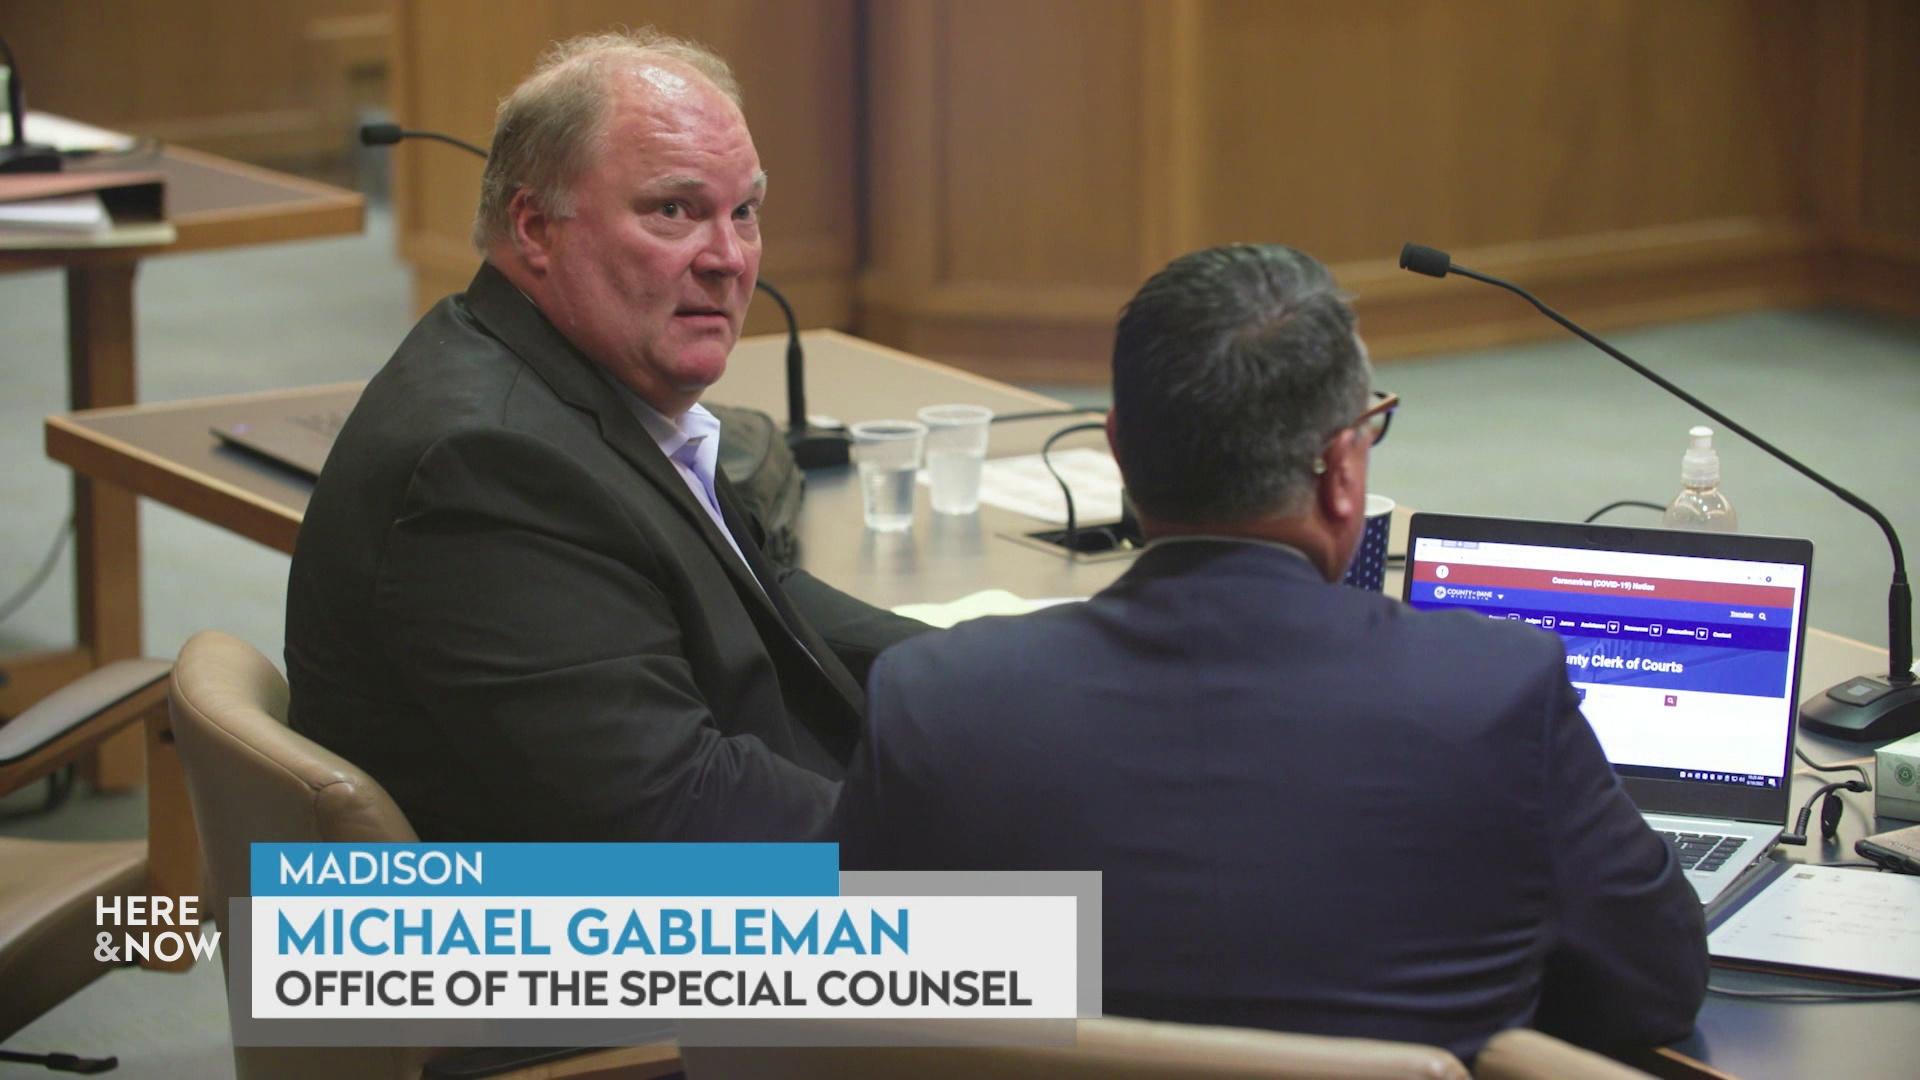 Gableman referred to Wisconsin’s Office of Lawyer Regulation